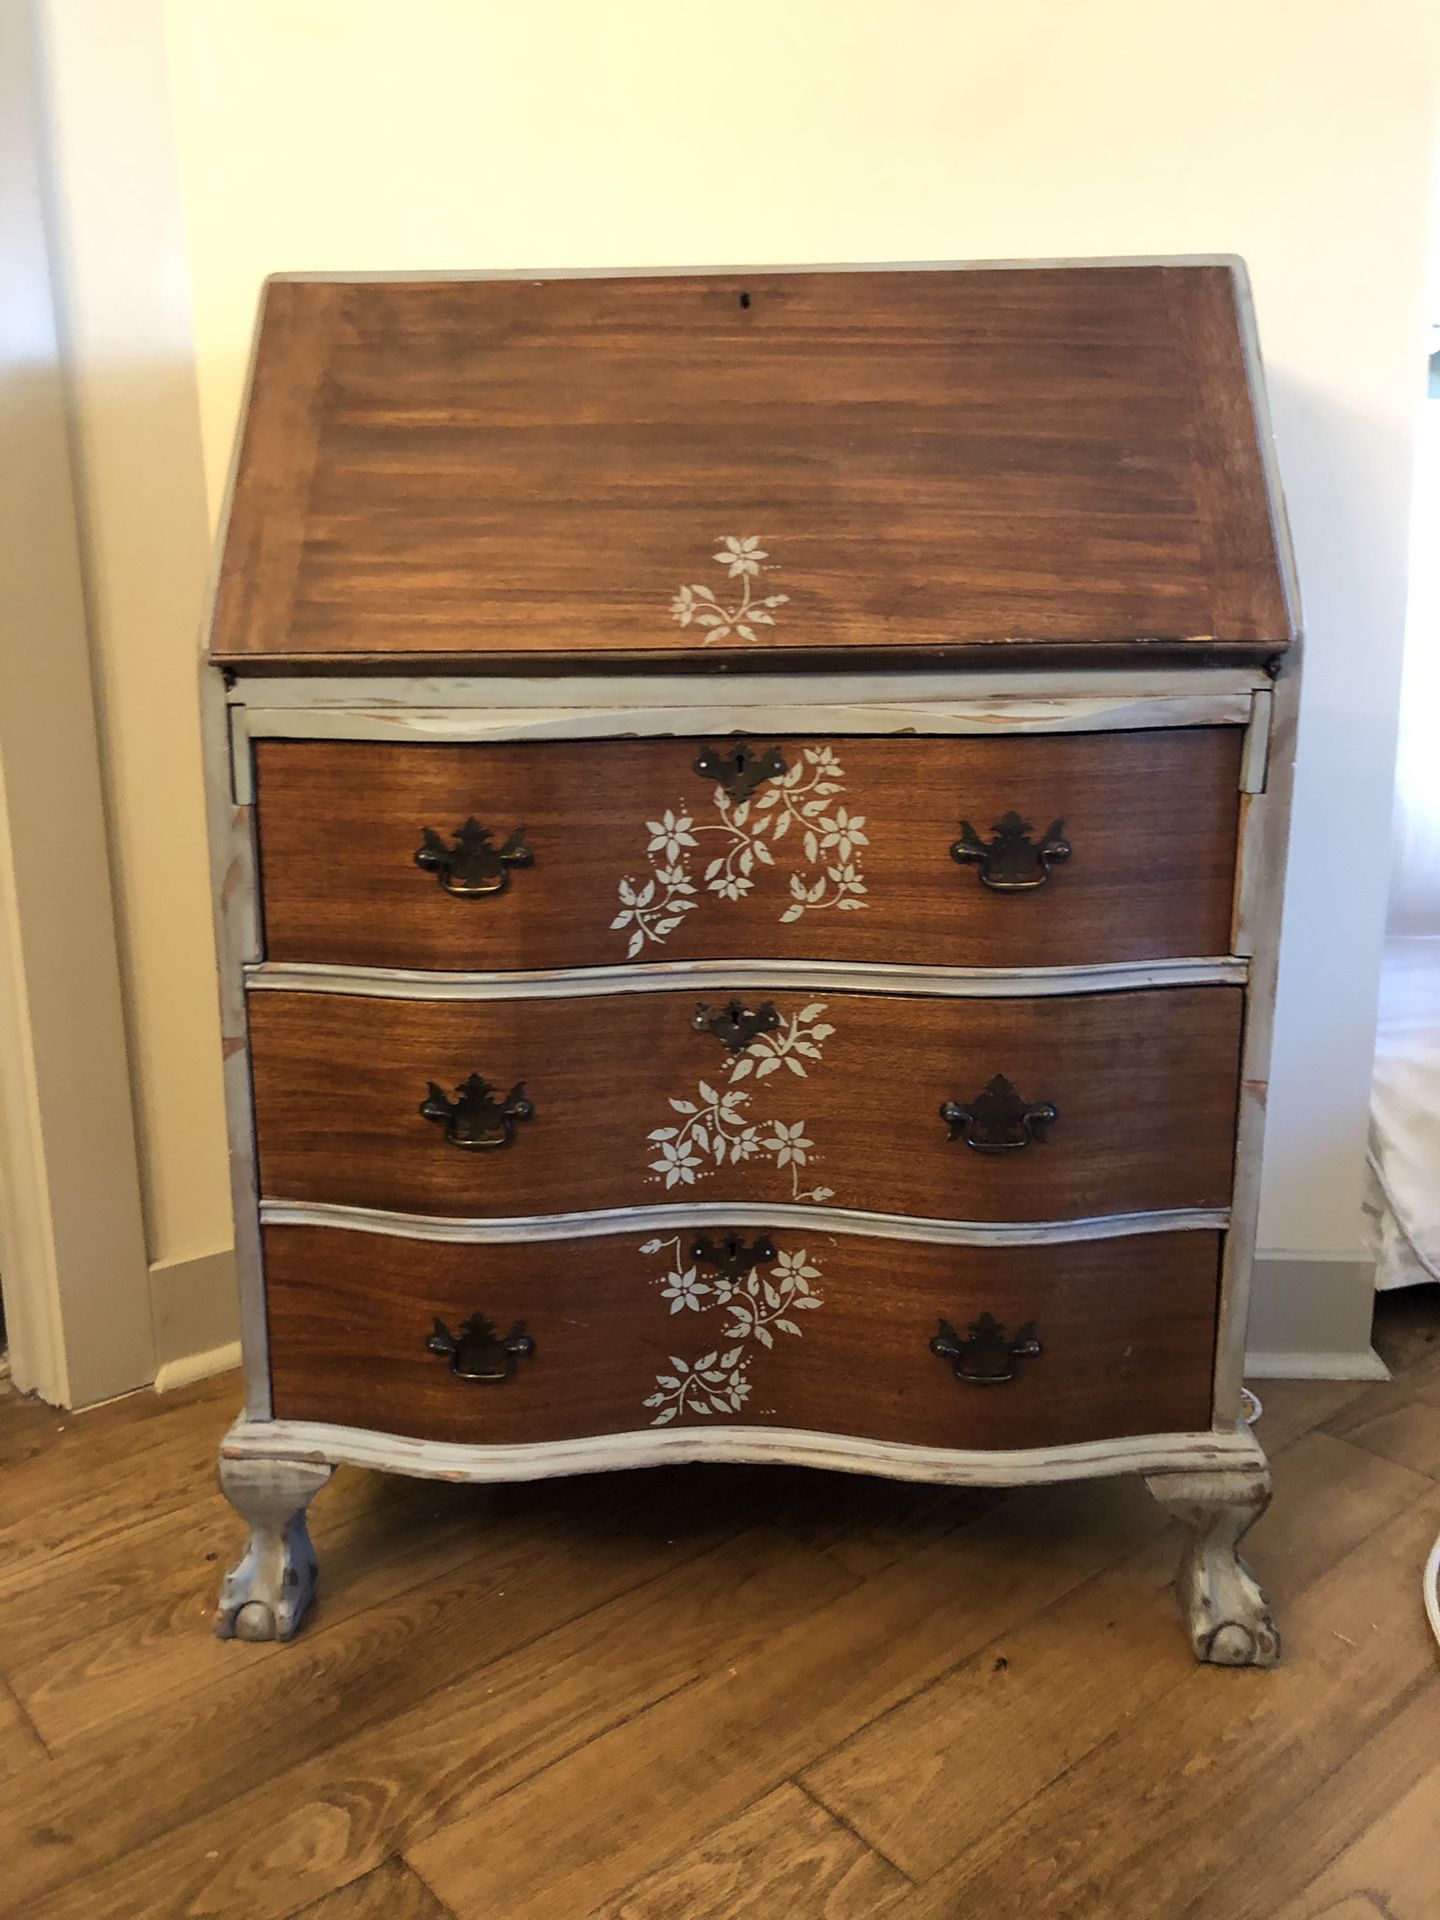 Hand painted, stained antique secretary desk